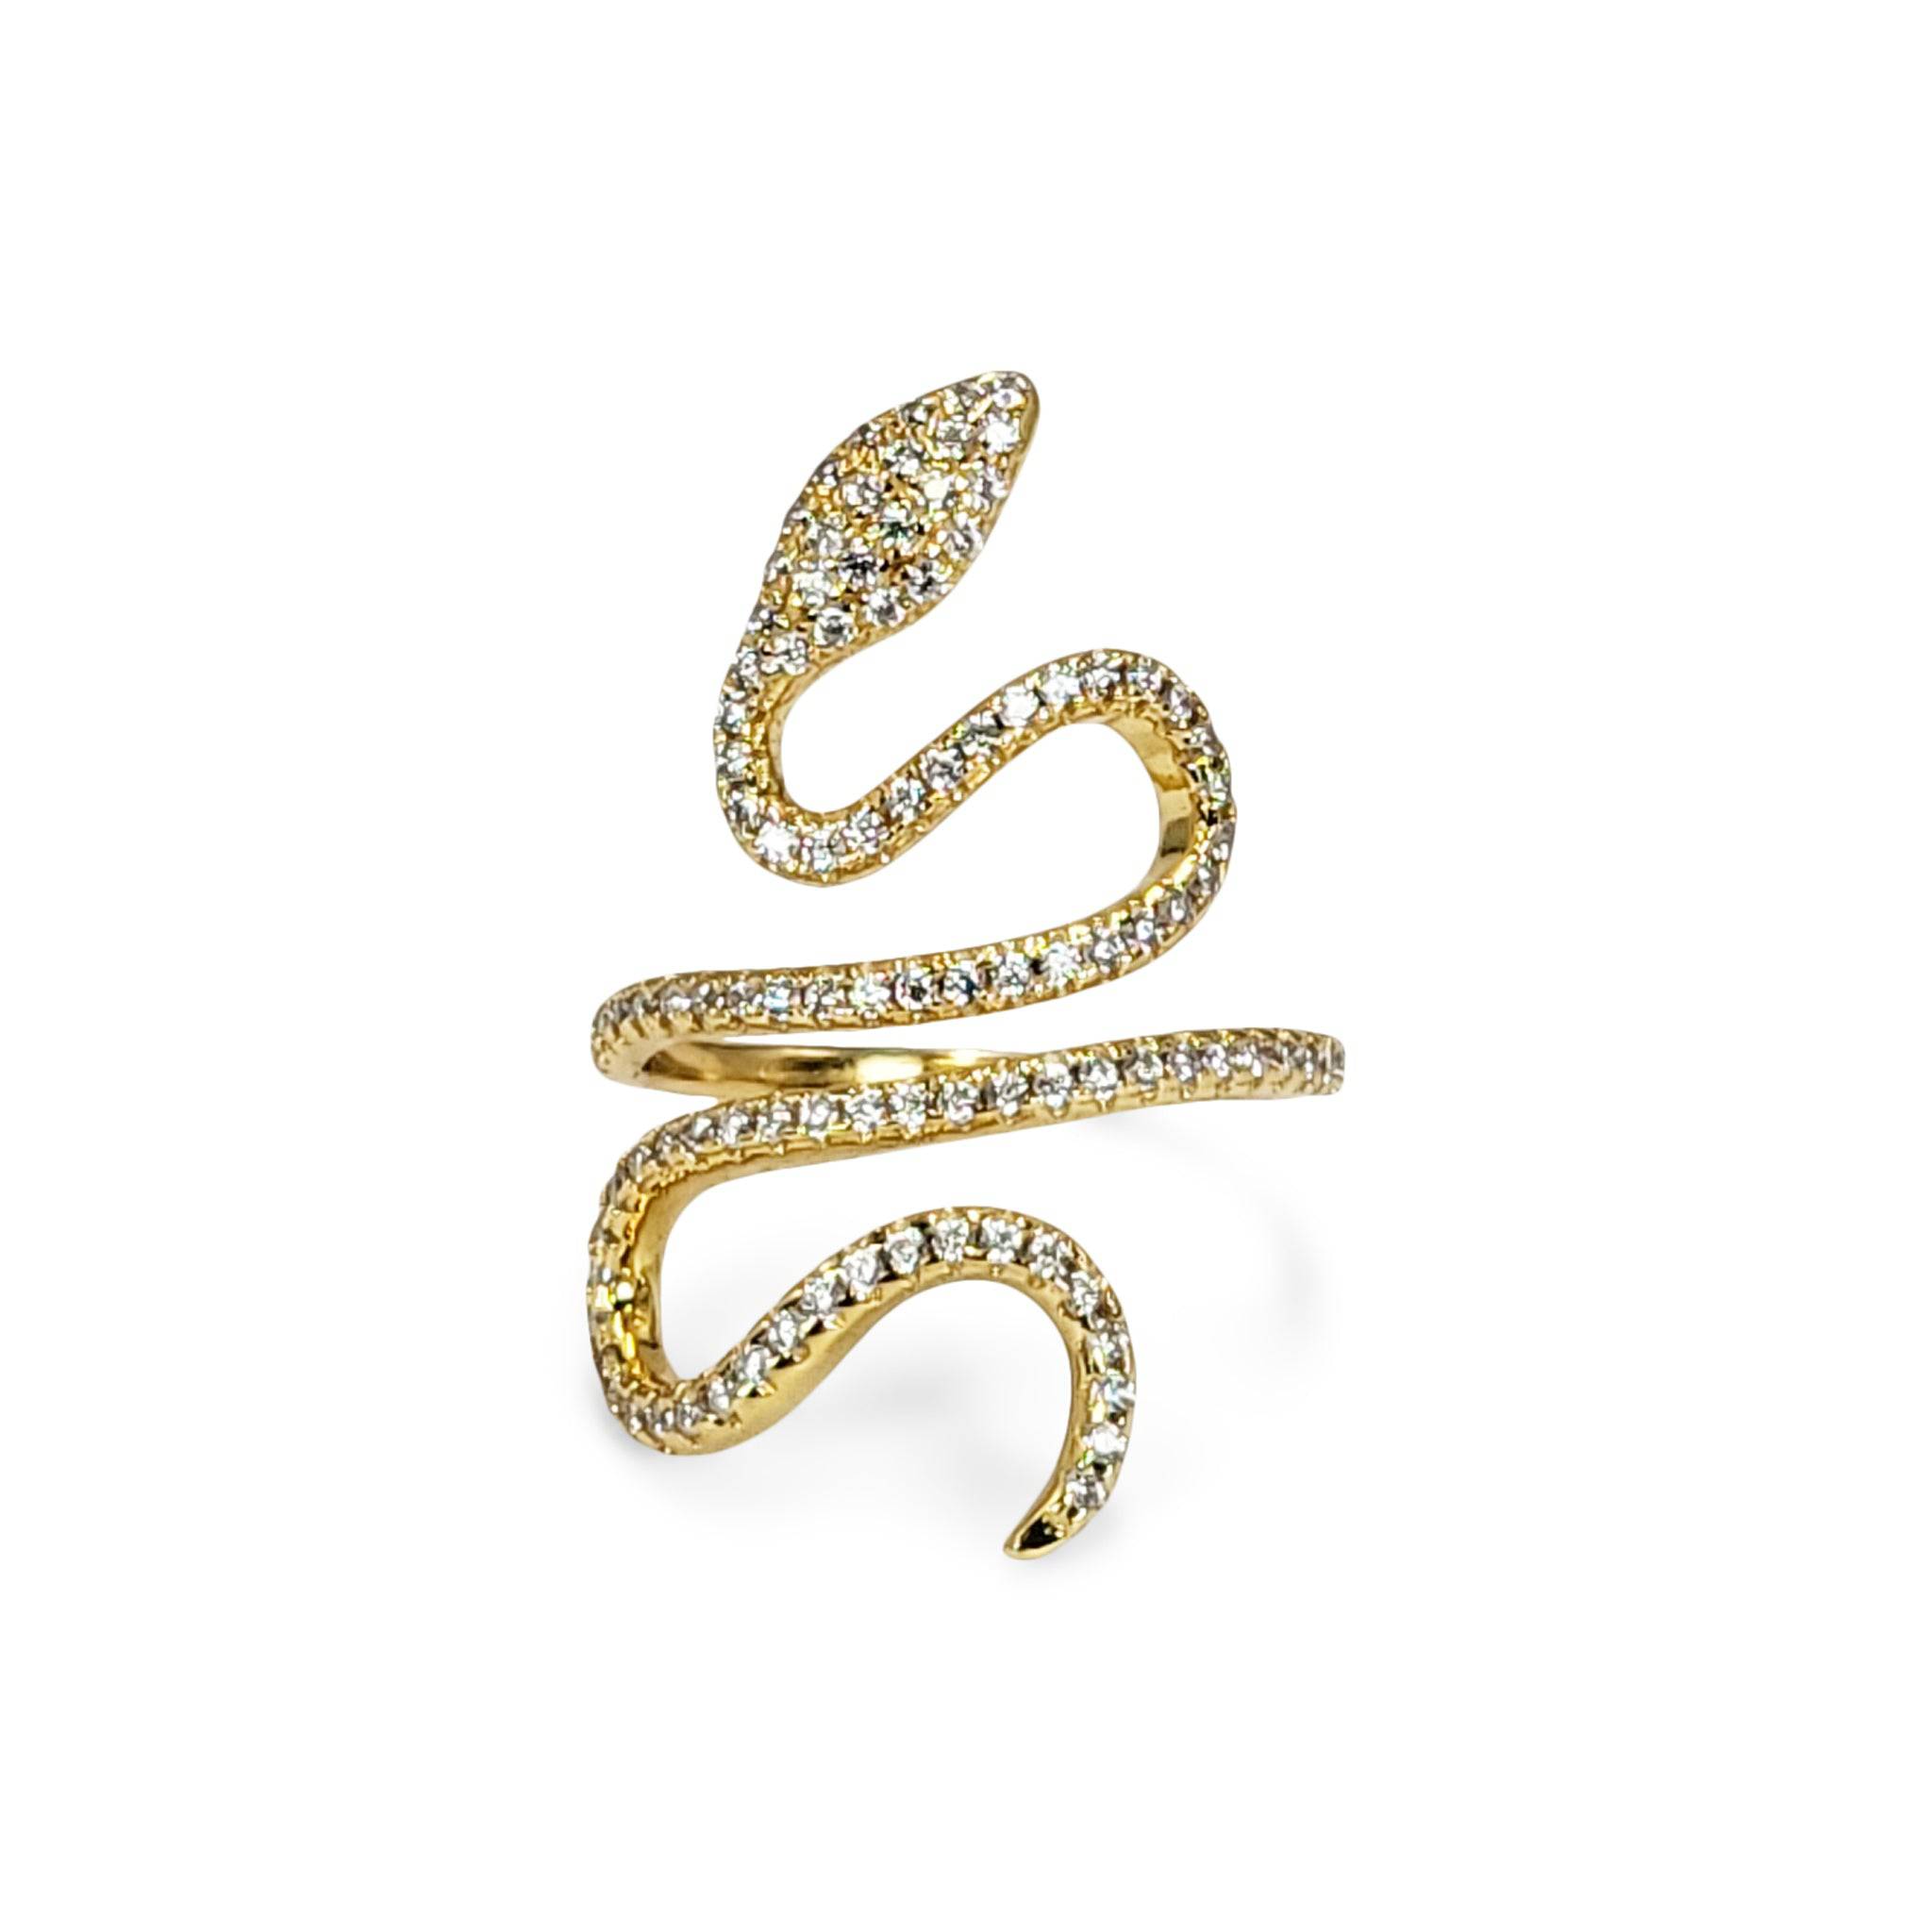 Enchanted Snake Ring - Gold - The Gilded Witch